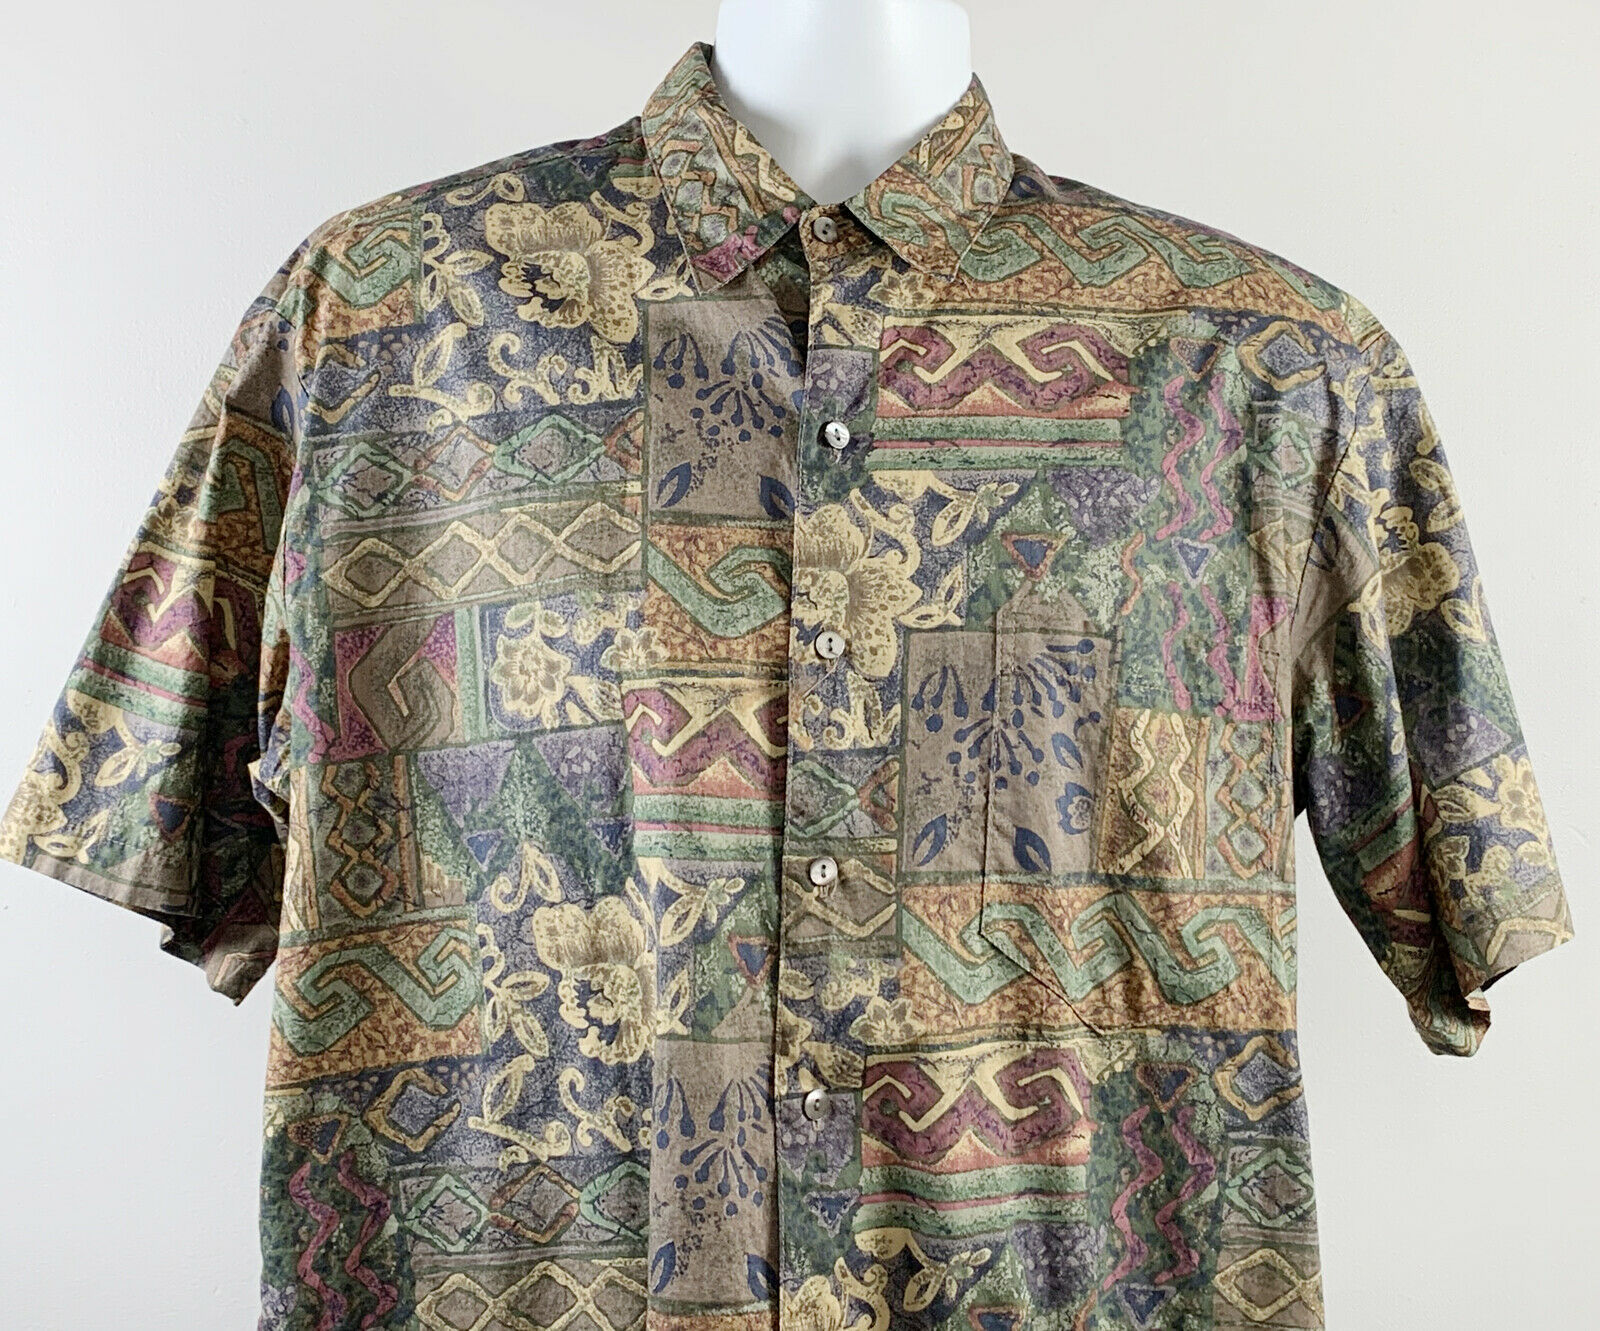 Primary image for Mens Tori Richard Button Front Shirt Medium Flowers Shapes 100% Cotton Colorful